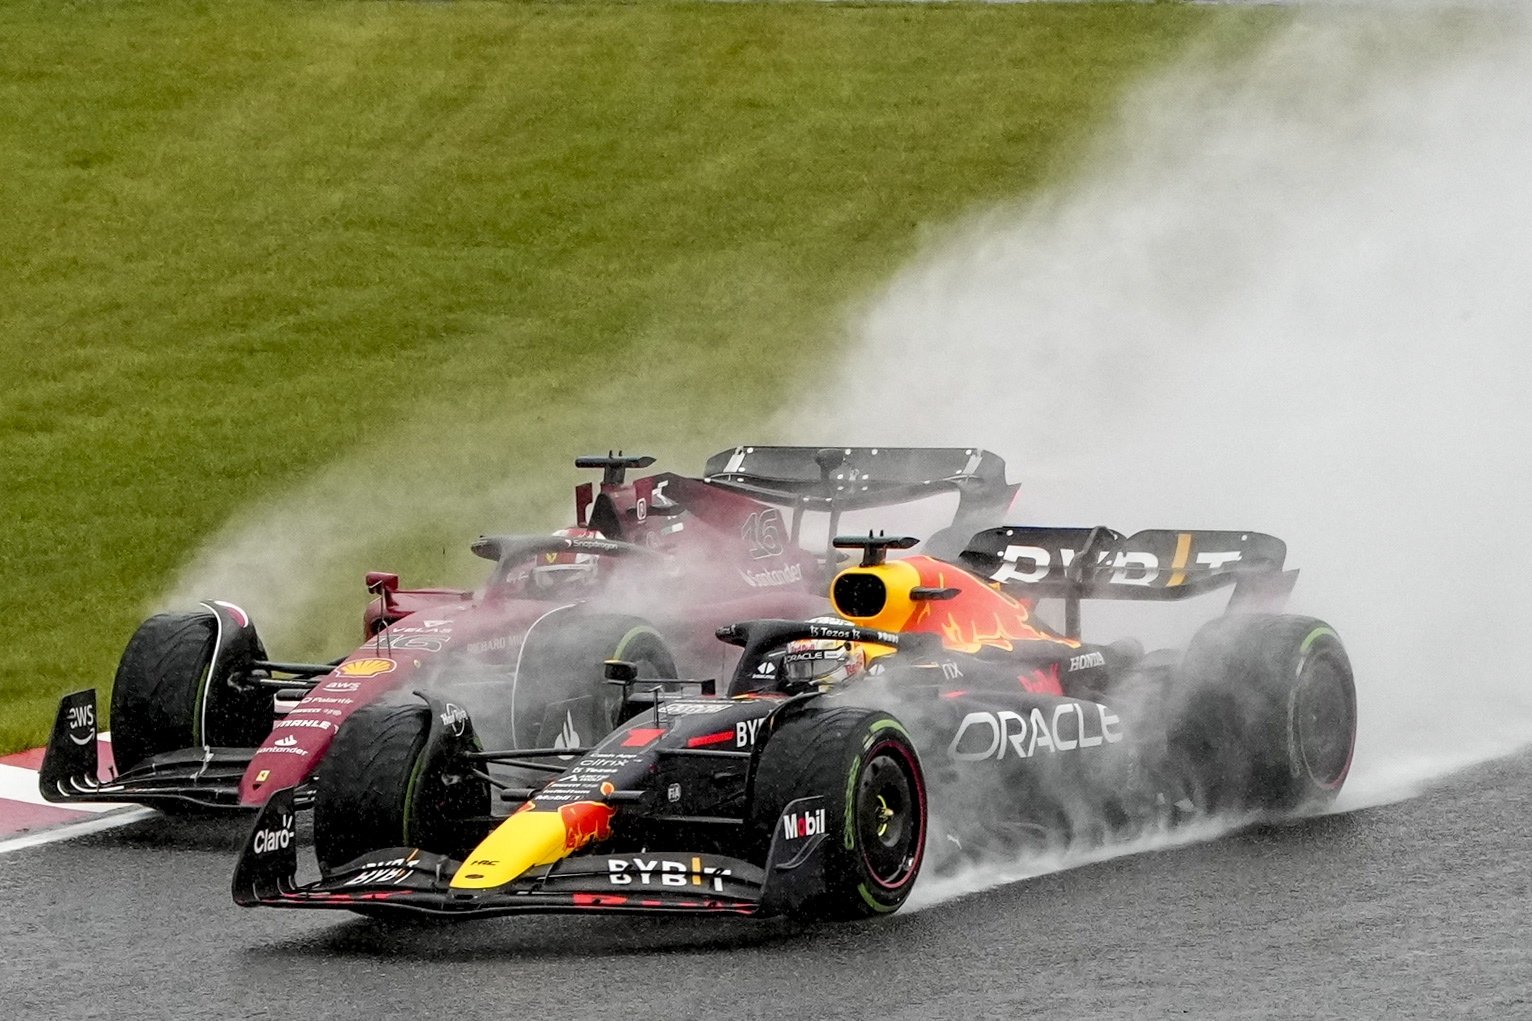 Monaco&#039;s Formula One driver Charles Leclerc (back) of Scuderia Ferrari and Dutch Formula One driver Max Verstappen of Red Bull Racing fight for position at the start of the Formula One Grand Prix of Japan at the Suzuka International Racing Course, Suzuka, Japan, Oct. 9, 2022.  (EPA Photo)